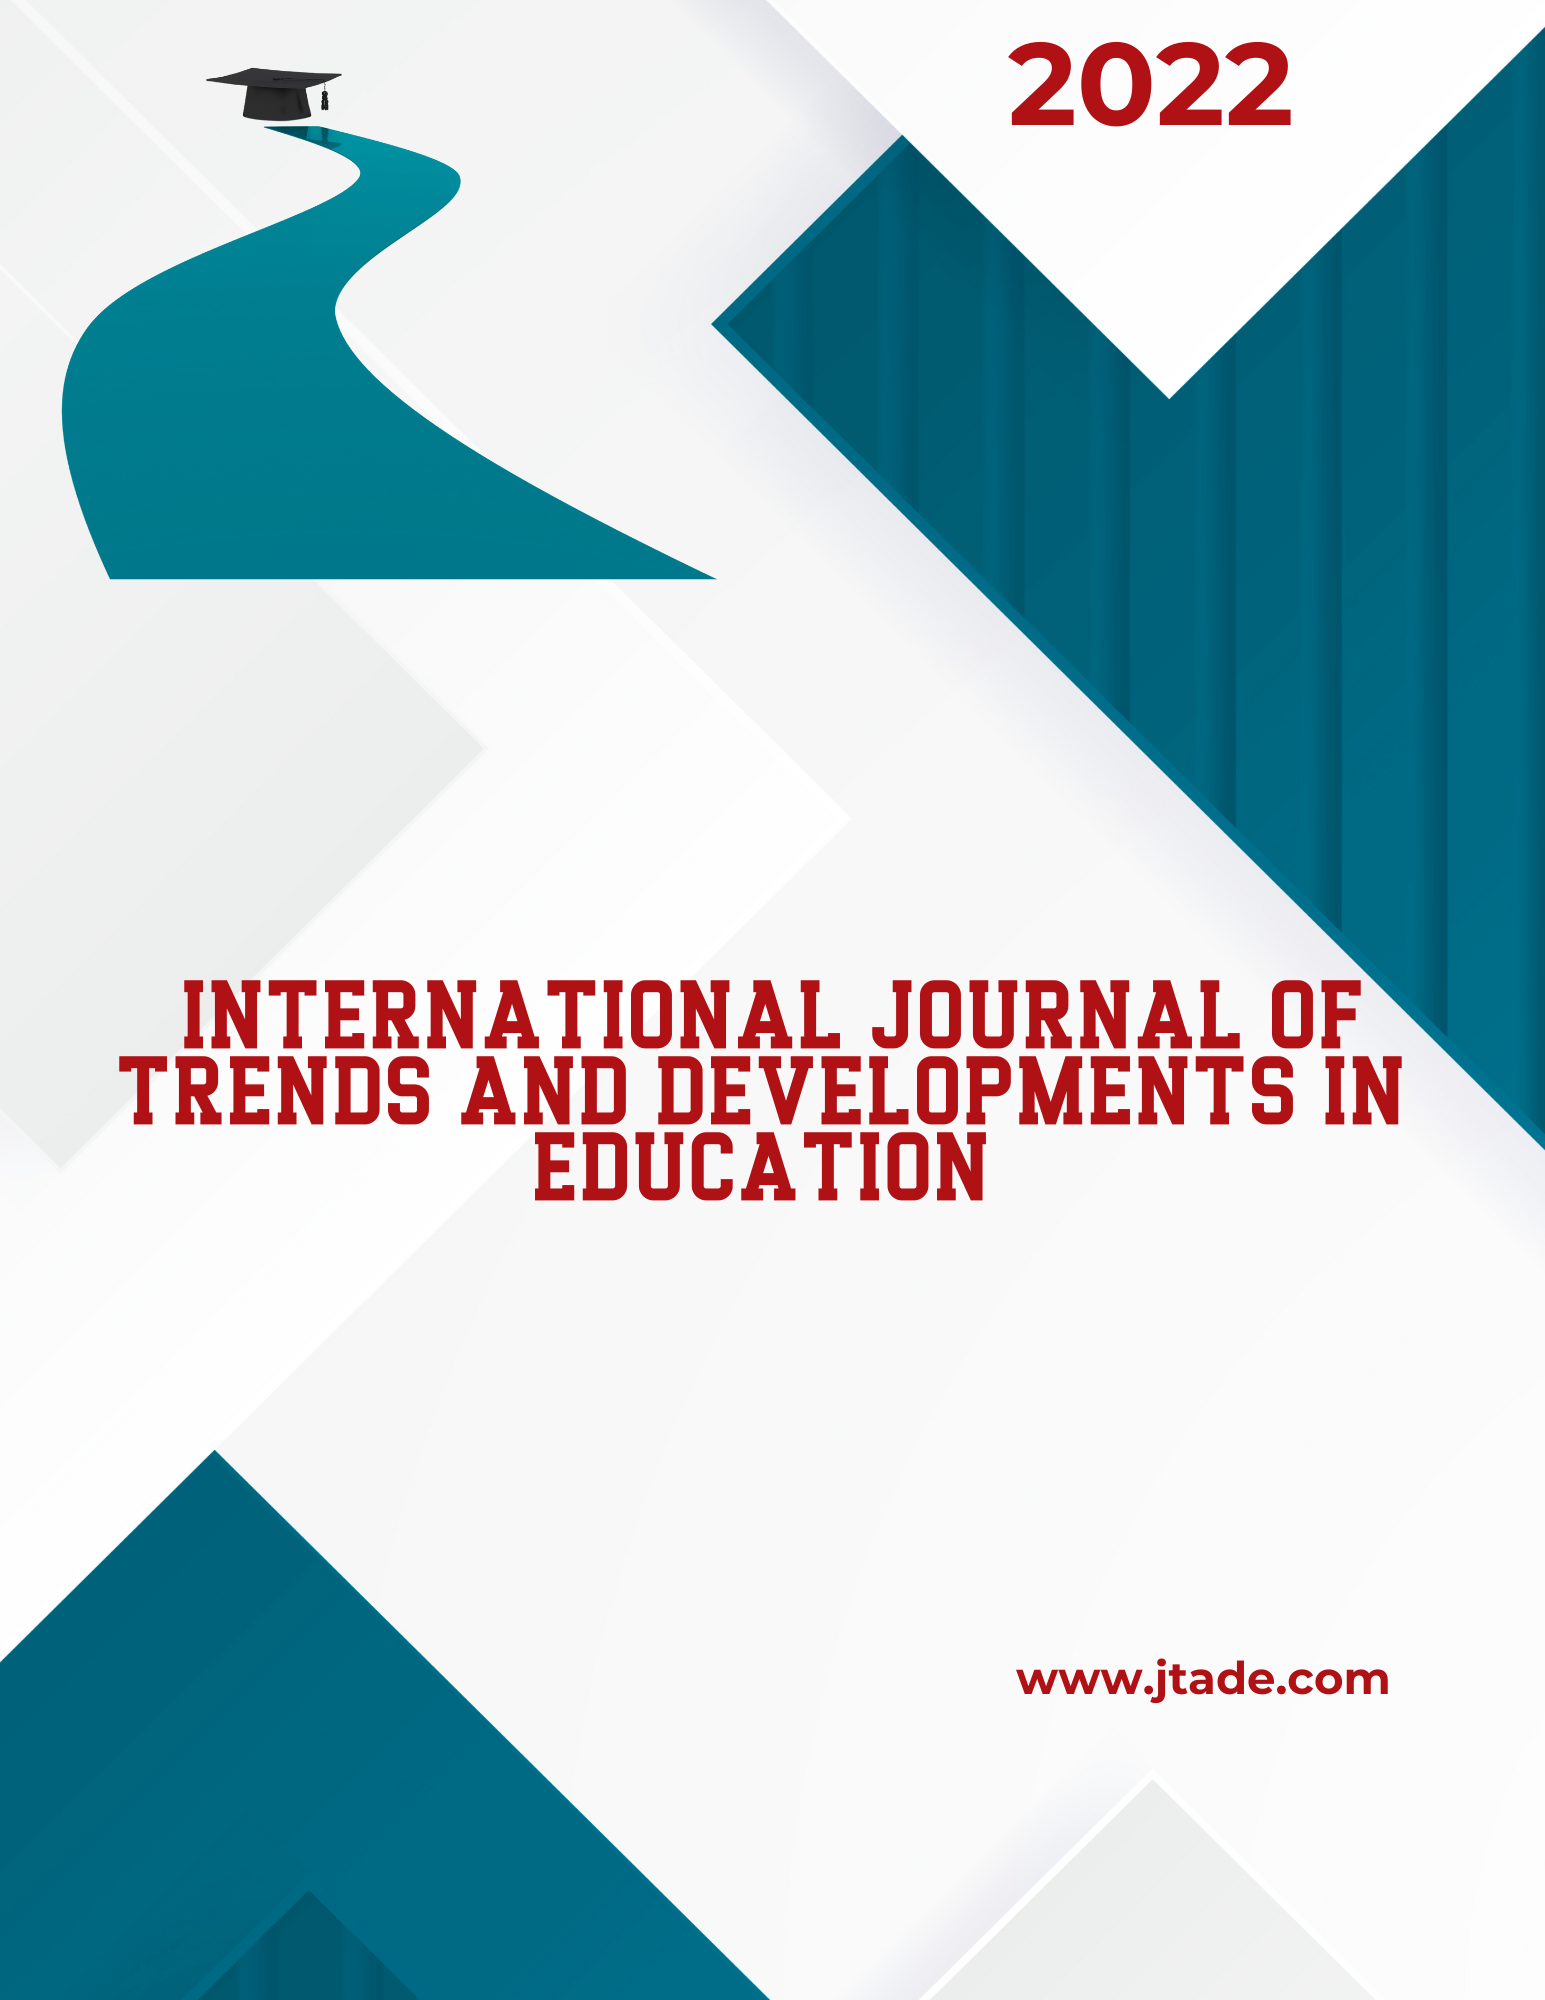 					View Vol. 2 No. 2 (2022): International Journal of Trends and Developments in Education
				